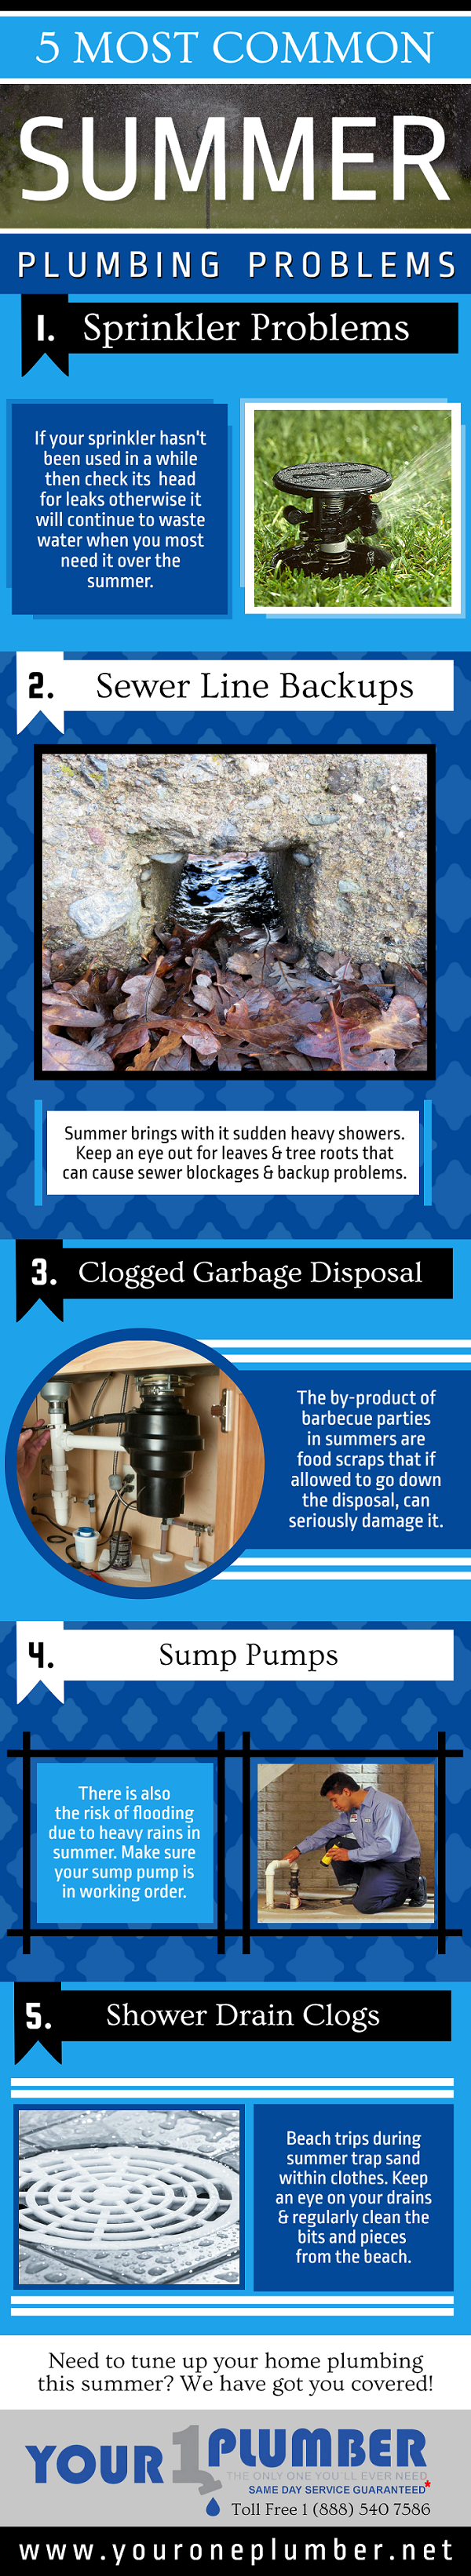 5 Most Common Summer Plumbing Problems